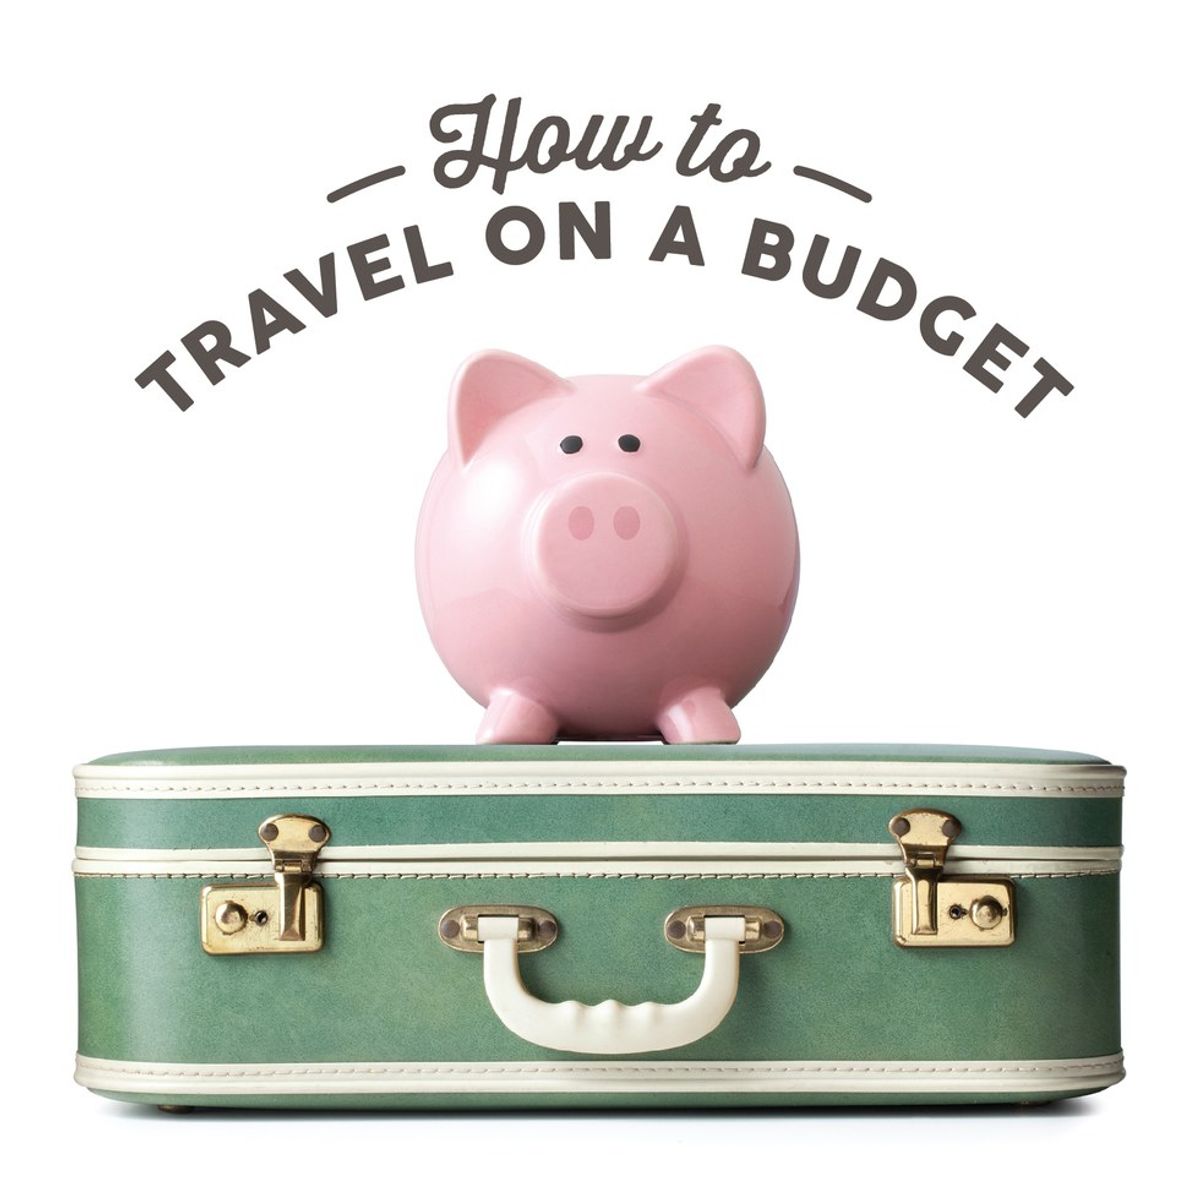 10 Tips for Traveling on a Budget